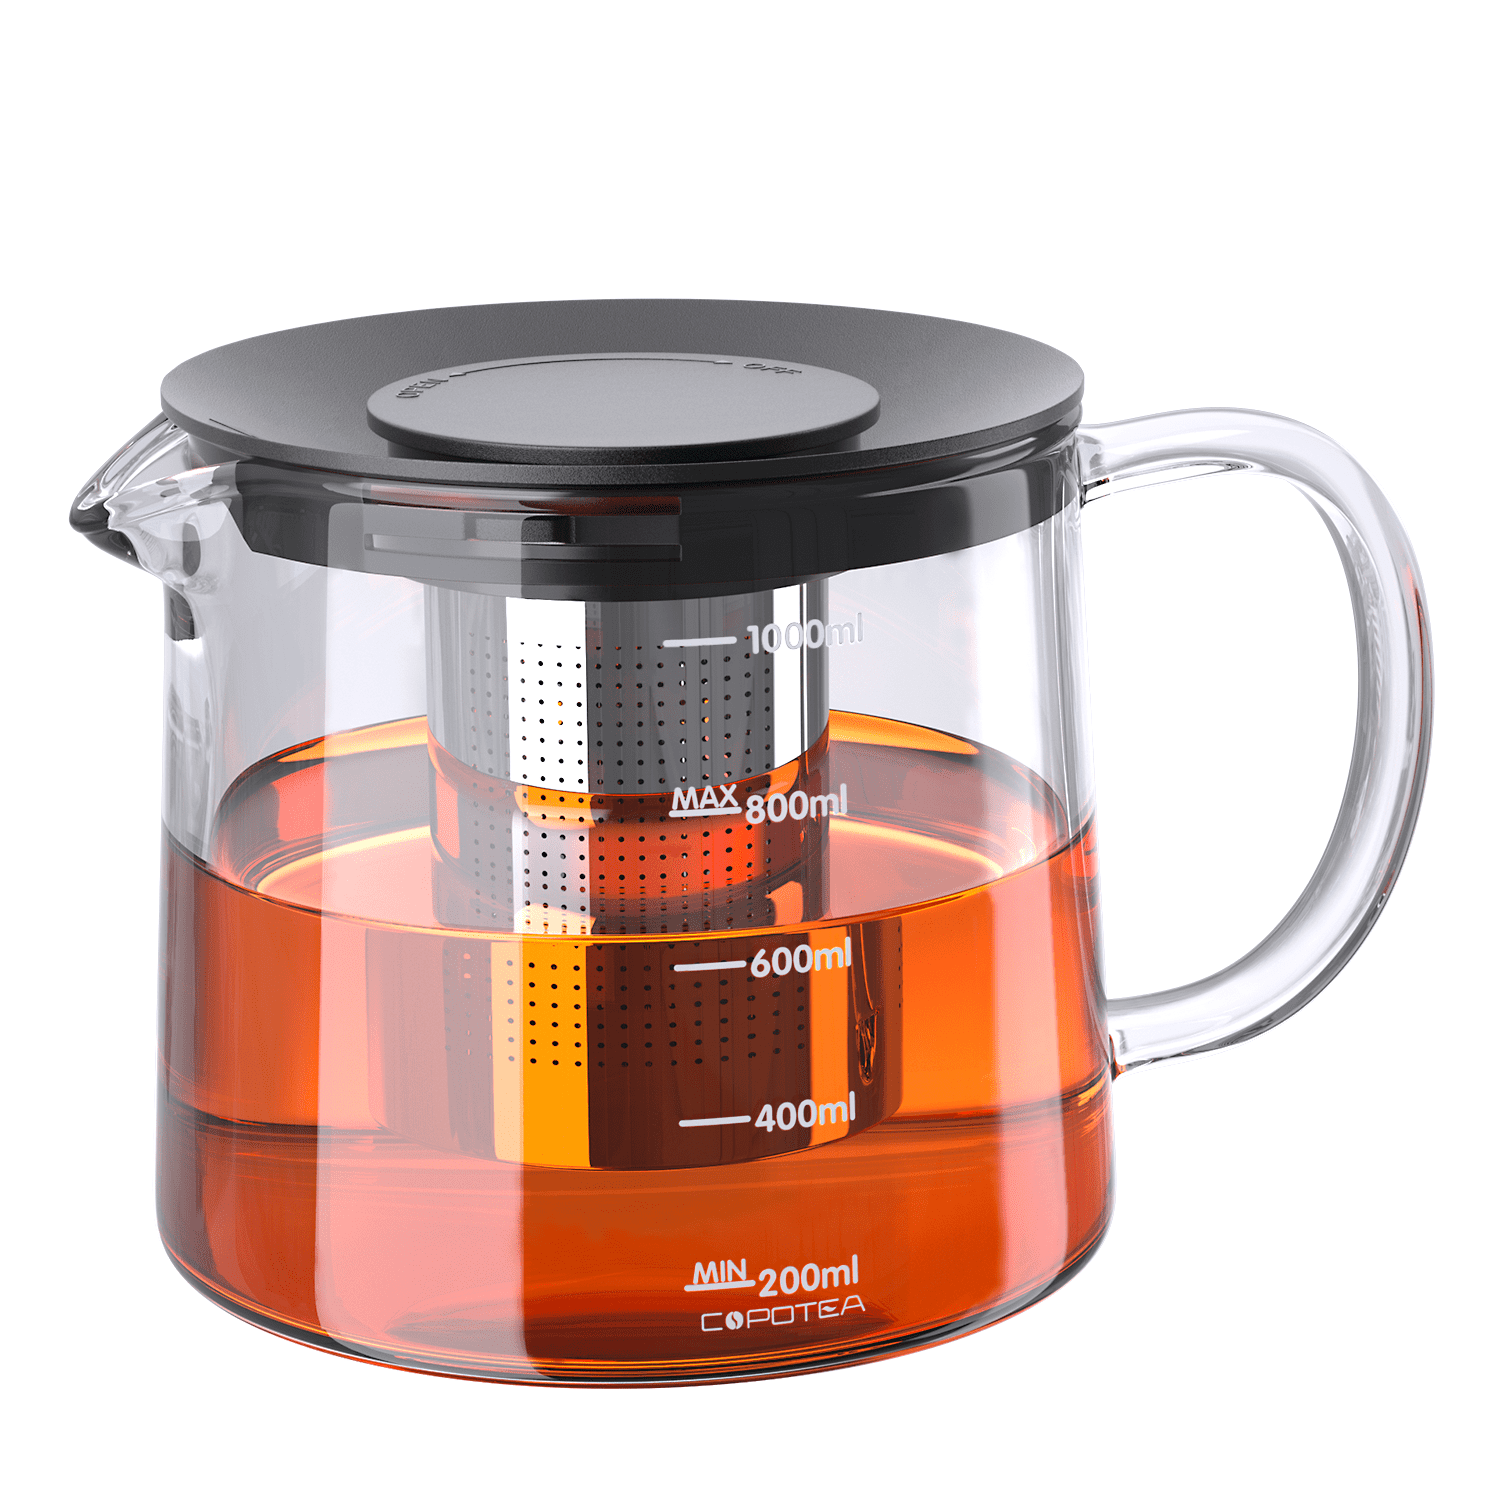 Unbreakable Glass Teapot,1000ml/34oz Borosilicate Glass Teapot with  Removable Infuser, Stovetop Safe Tea Kettle,Blooming and Loose Leaf Tea  Maker